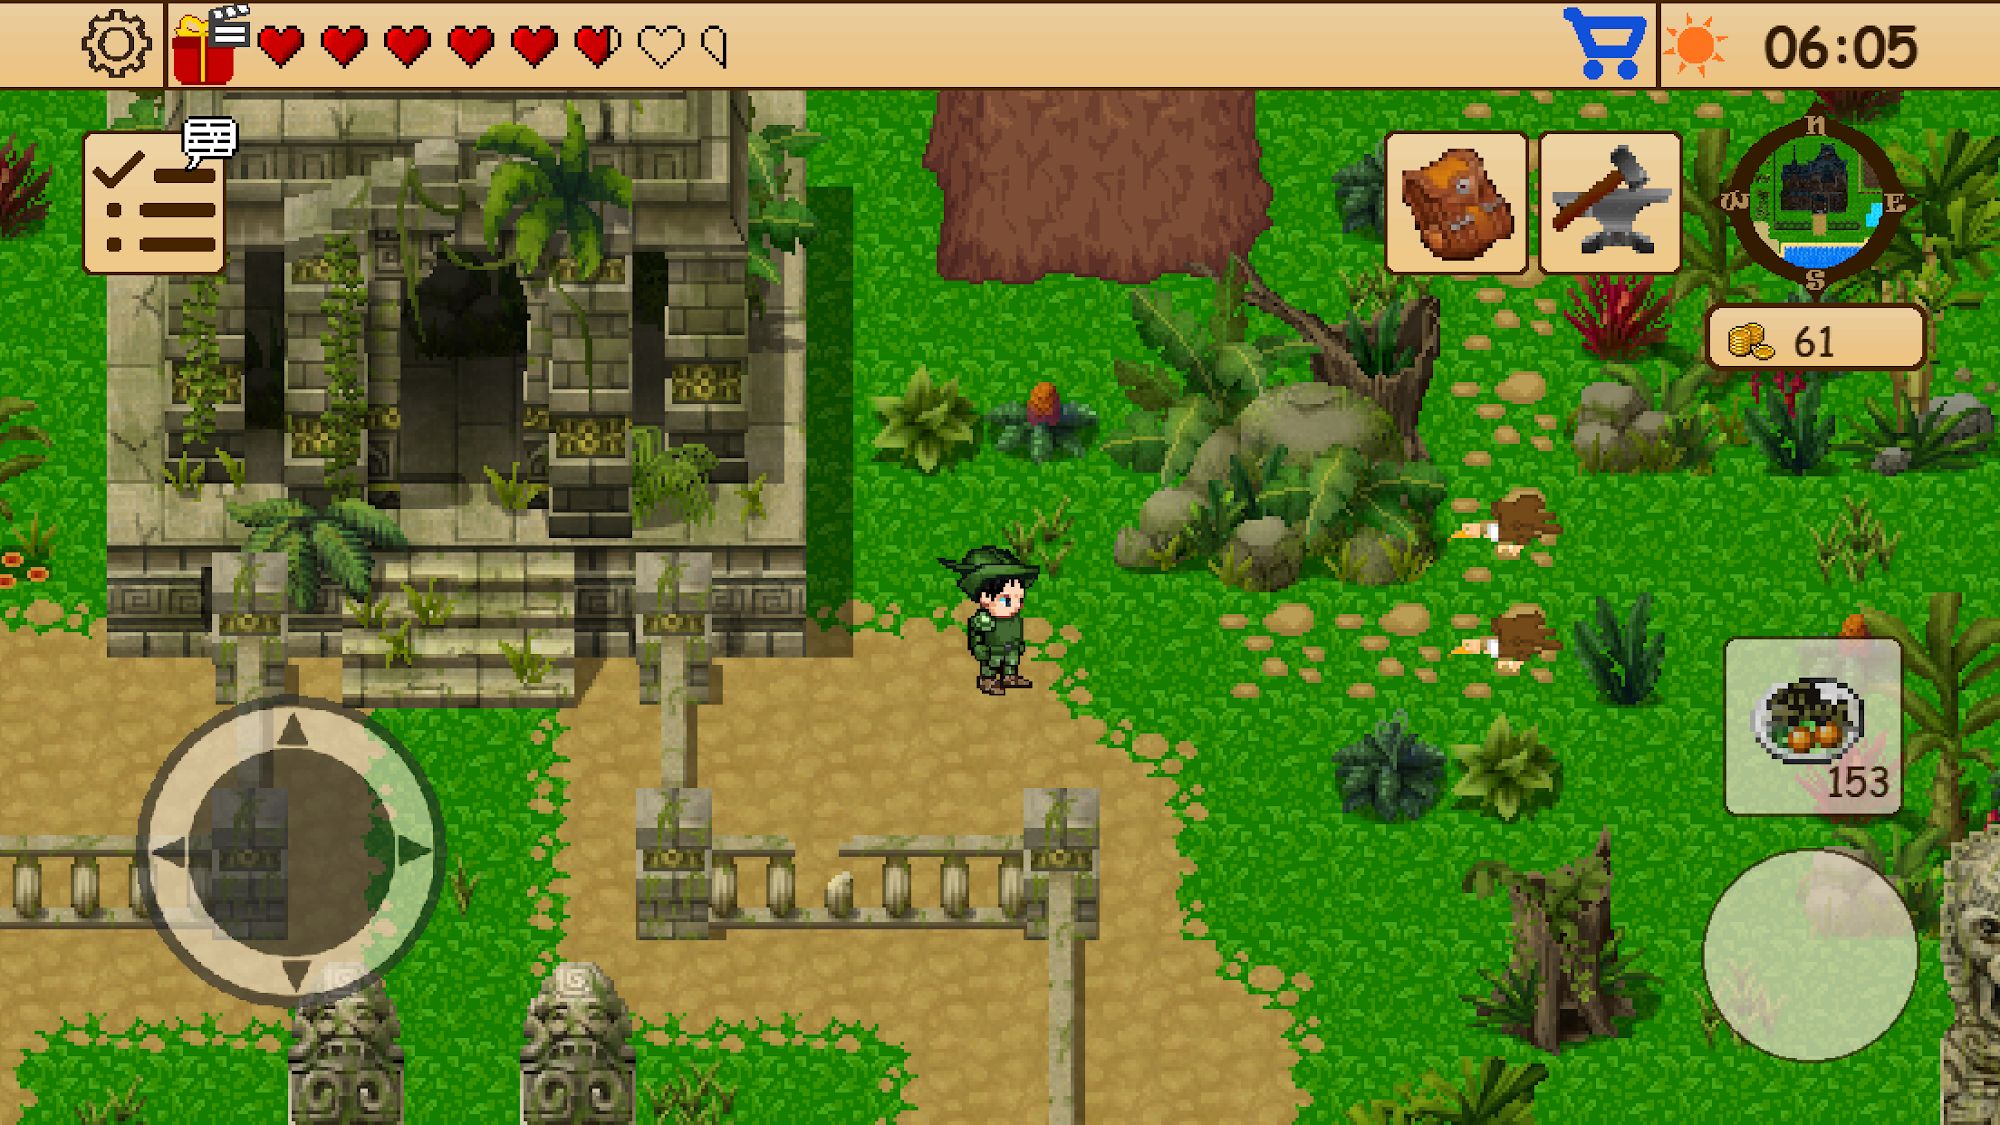 Survival RPG 4: Haunted Manor - Android game screenshots.